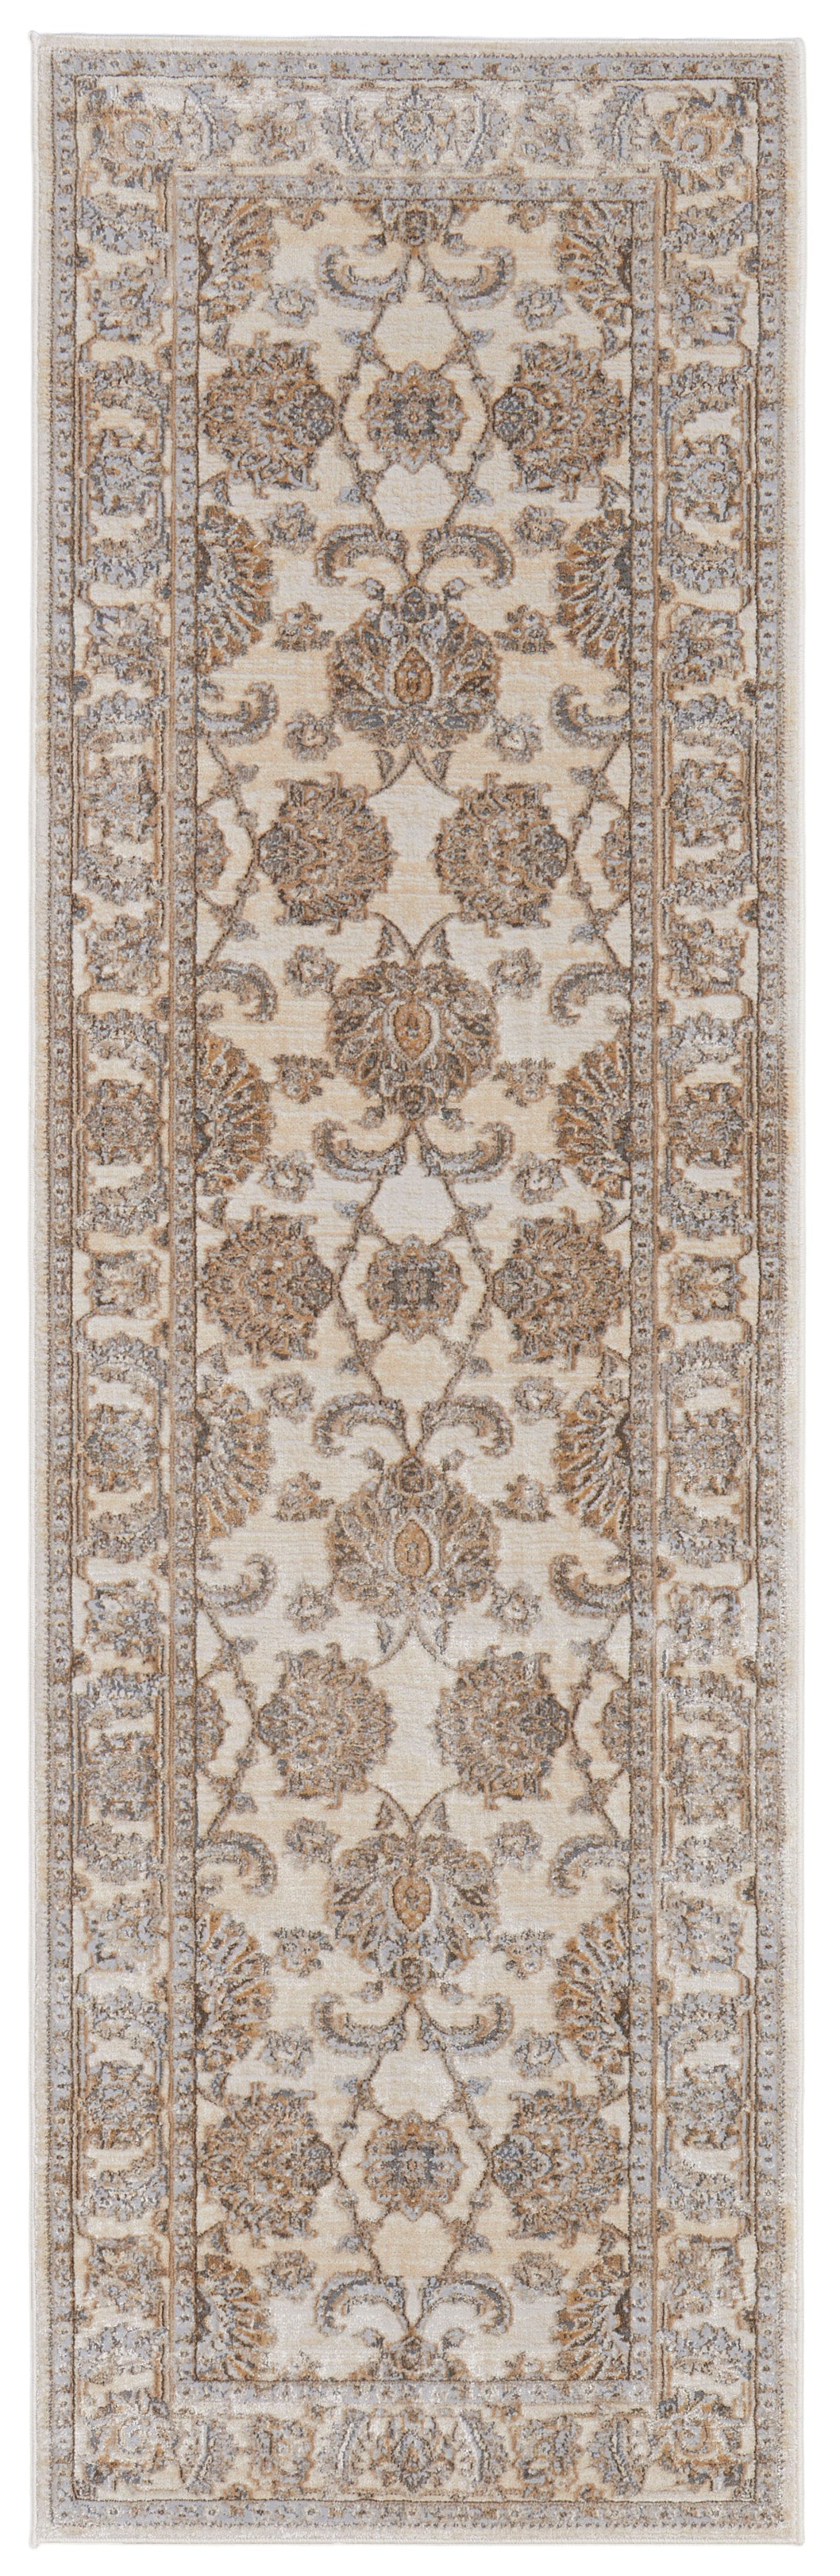 Celene Traditional Bordered Runner Available in 7 Colors